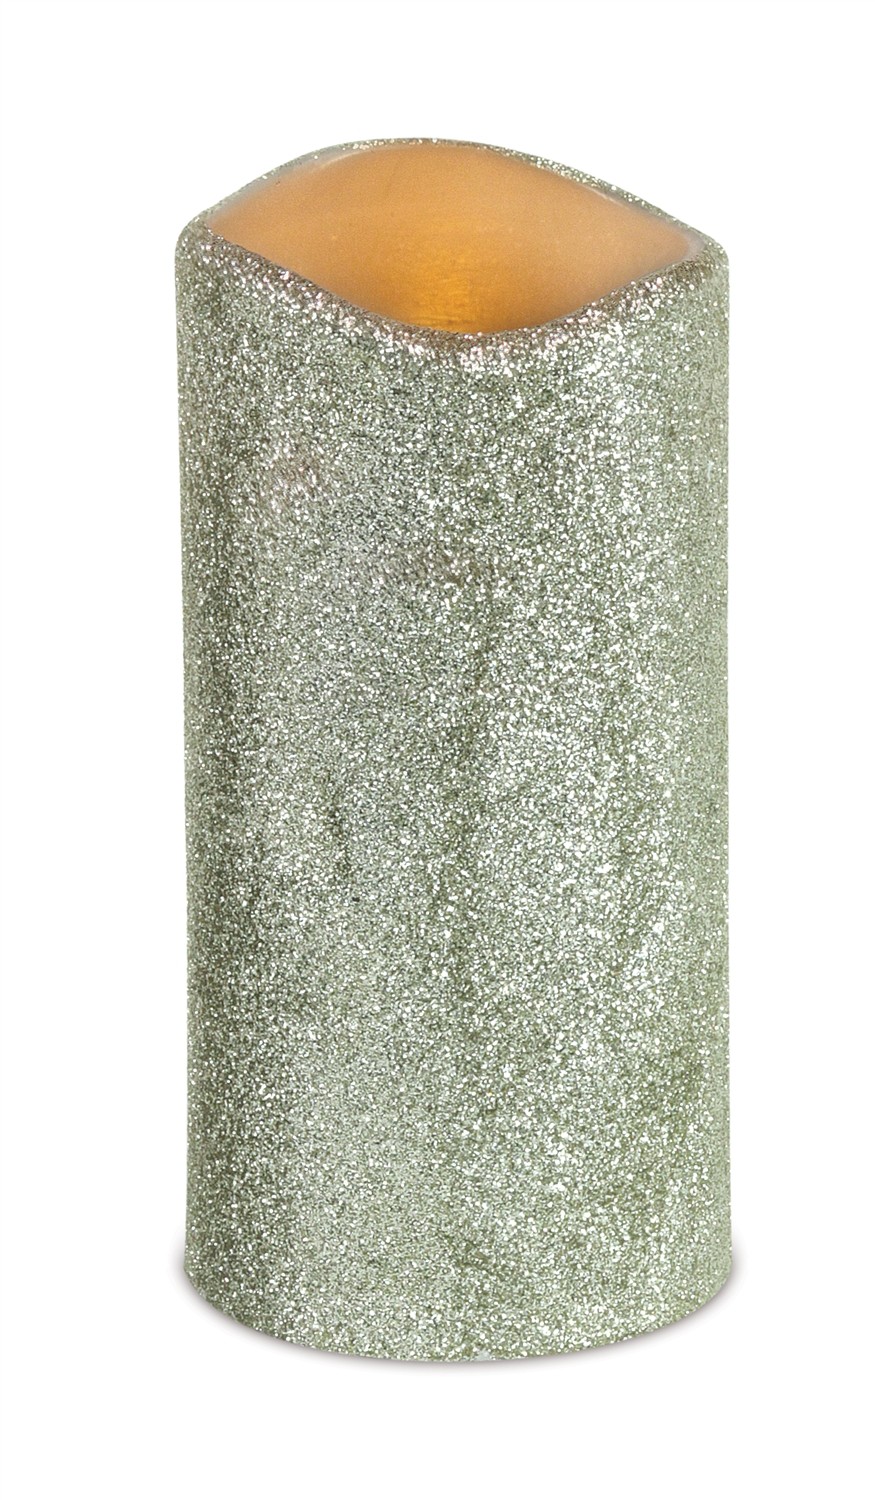 LED Melted Glitter Candle (Set of 2) 3"Dx6"H Wax/Plastic - 2C Batteries not Incld